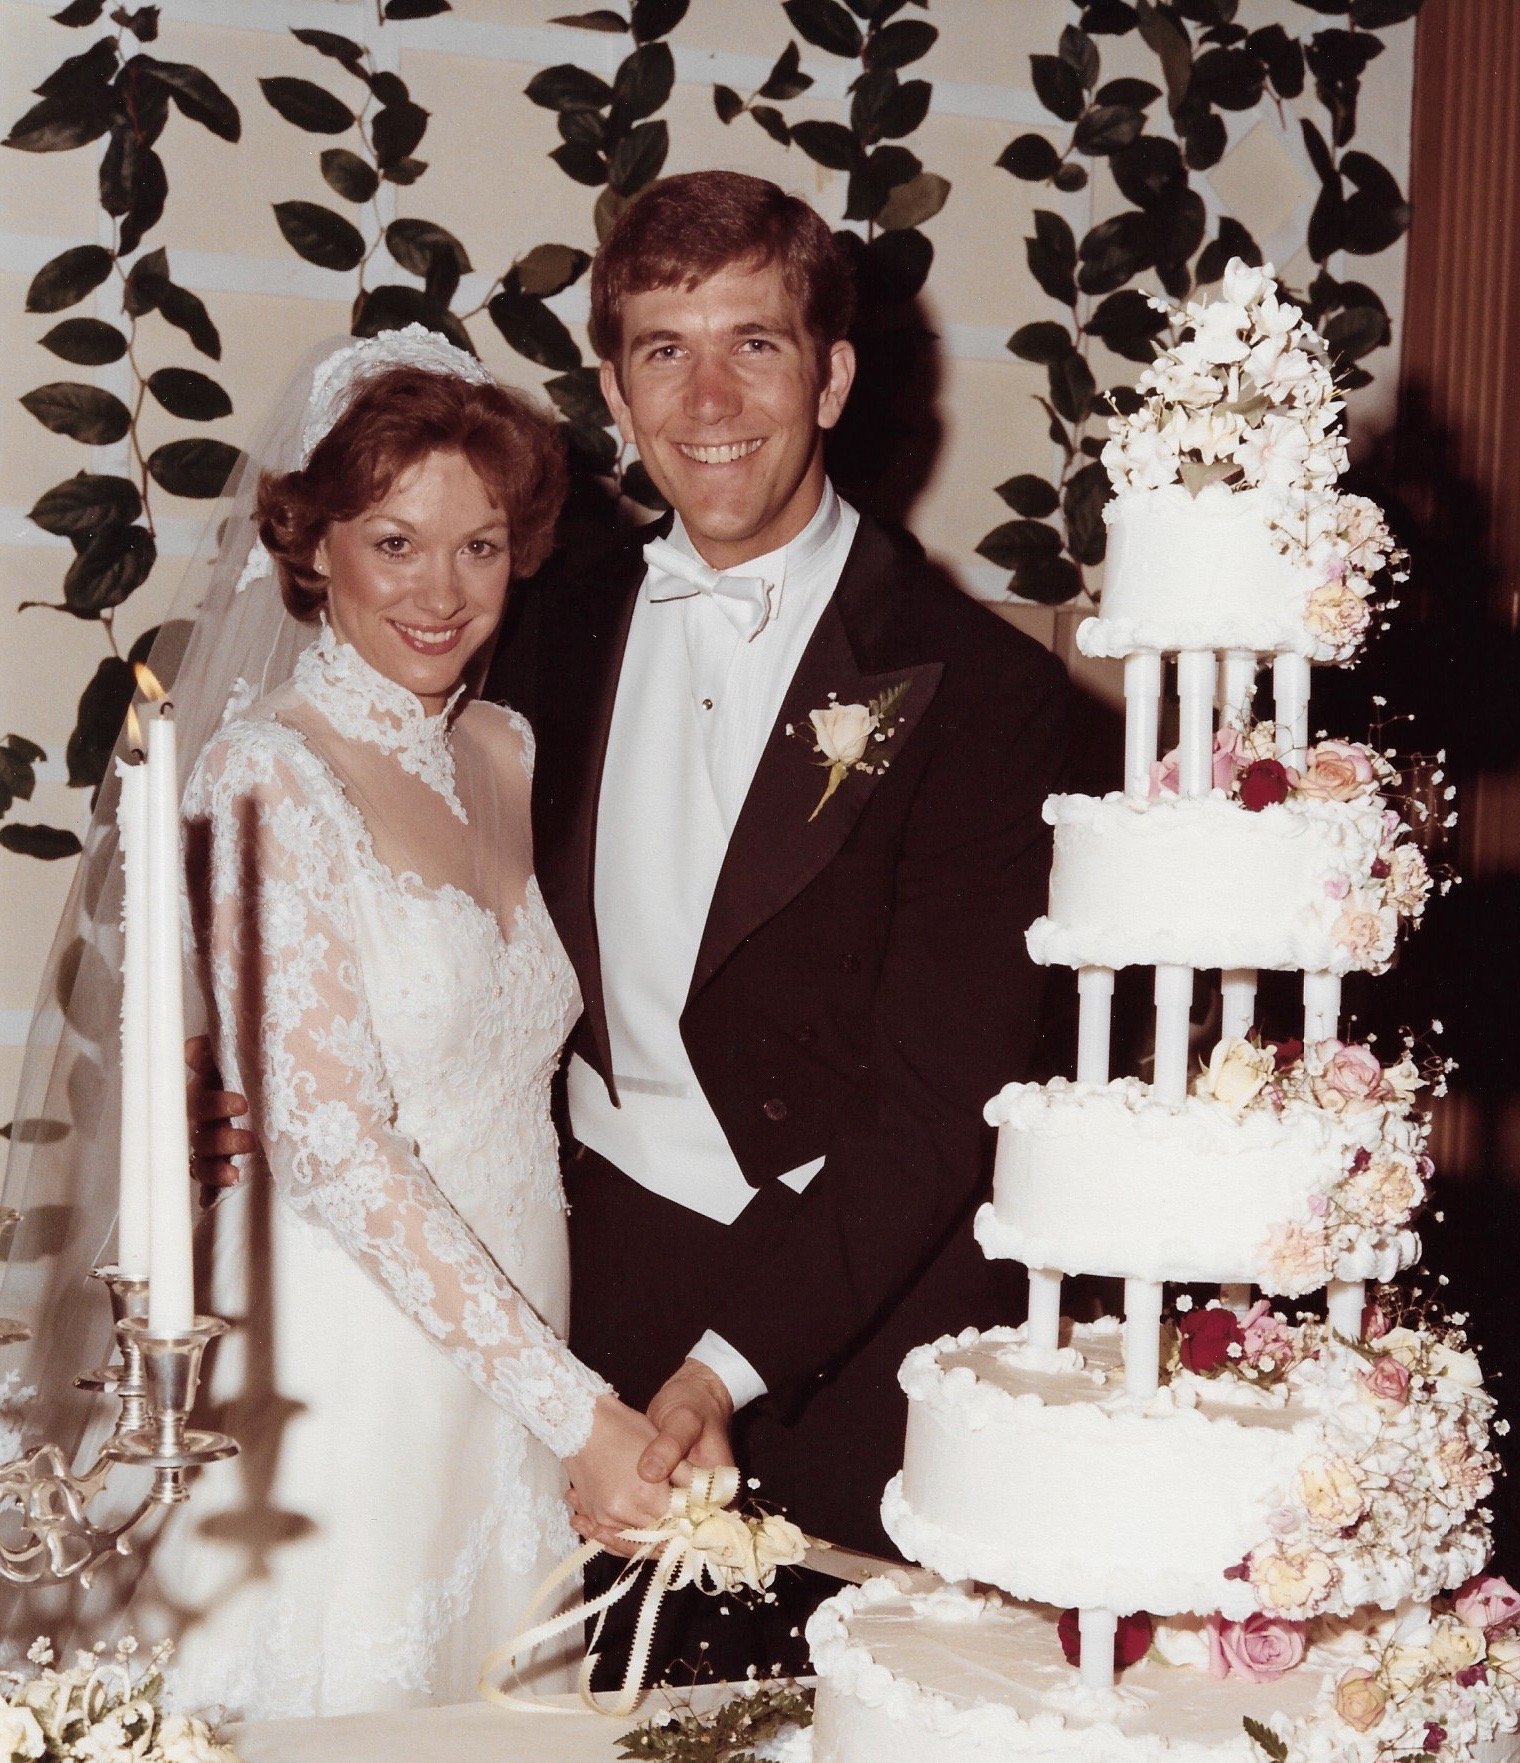 Evelyn and Rick's wedding day in February 1982